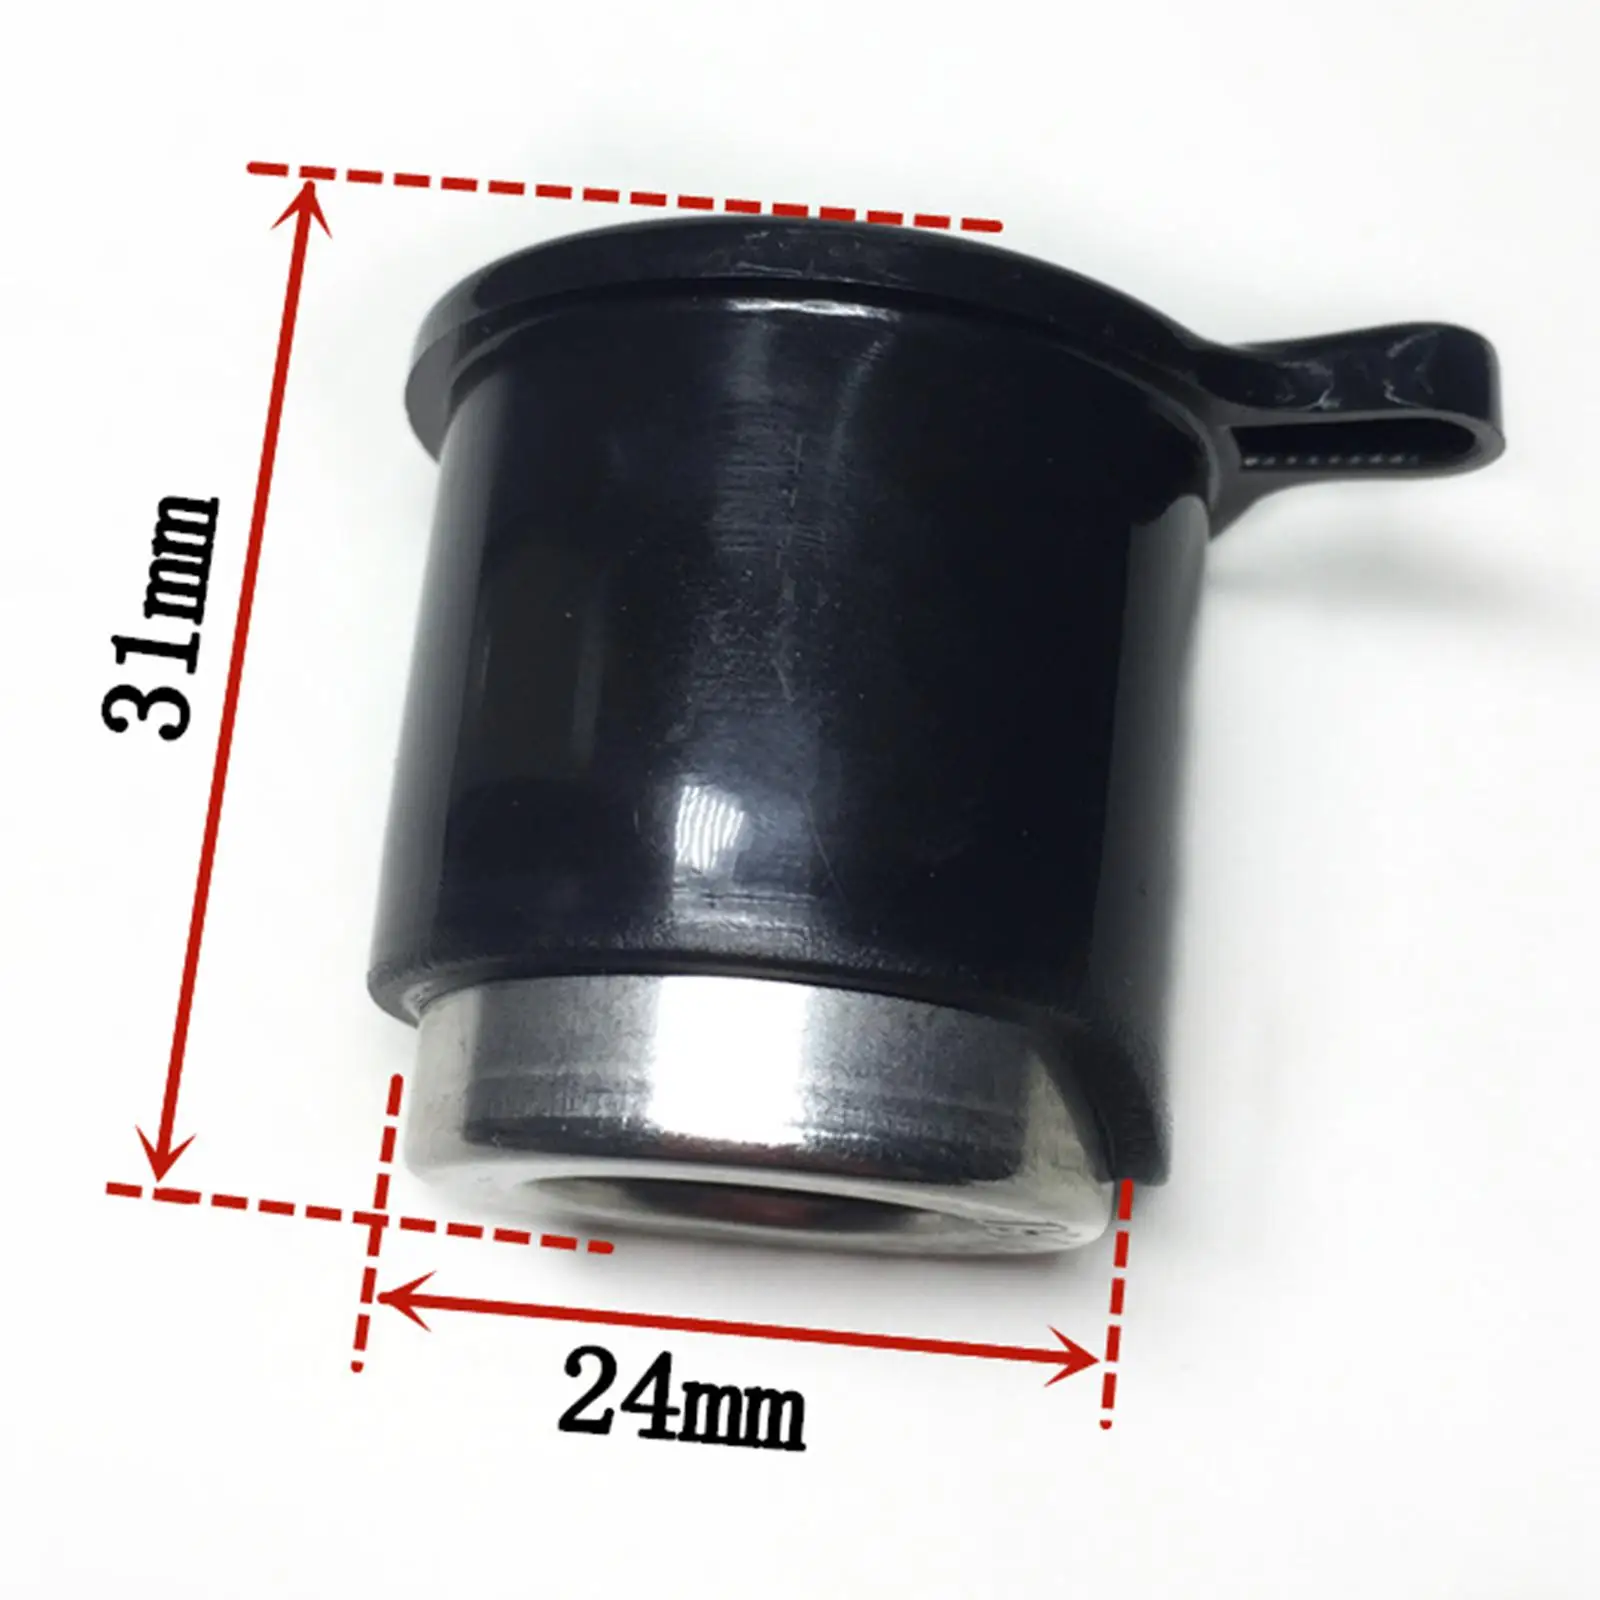 Replacement Steam Release Handle Steam Air Valve Pressure Valve Release Handle for Plfj4001 Plfe5002 Pressure Pot Accessories